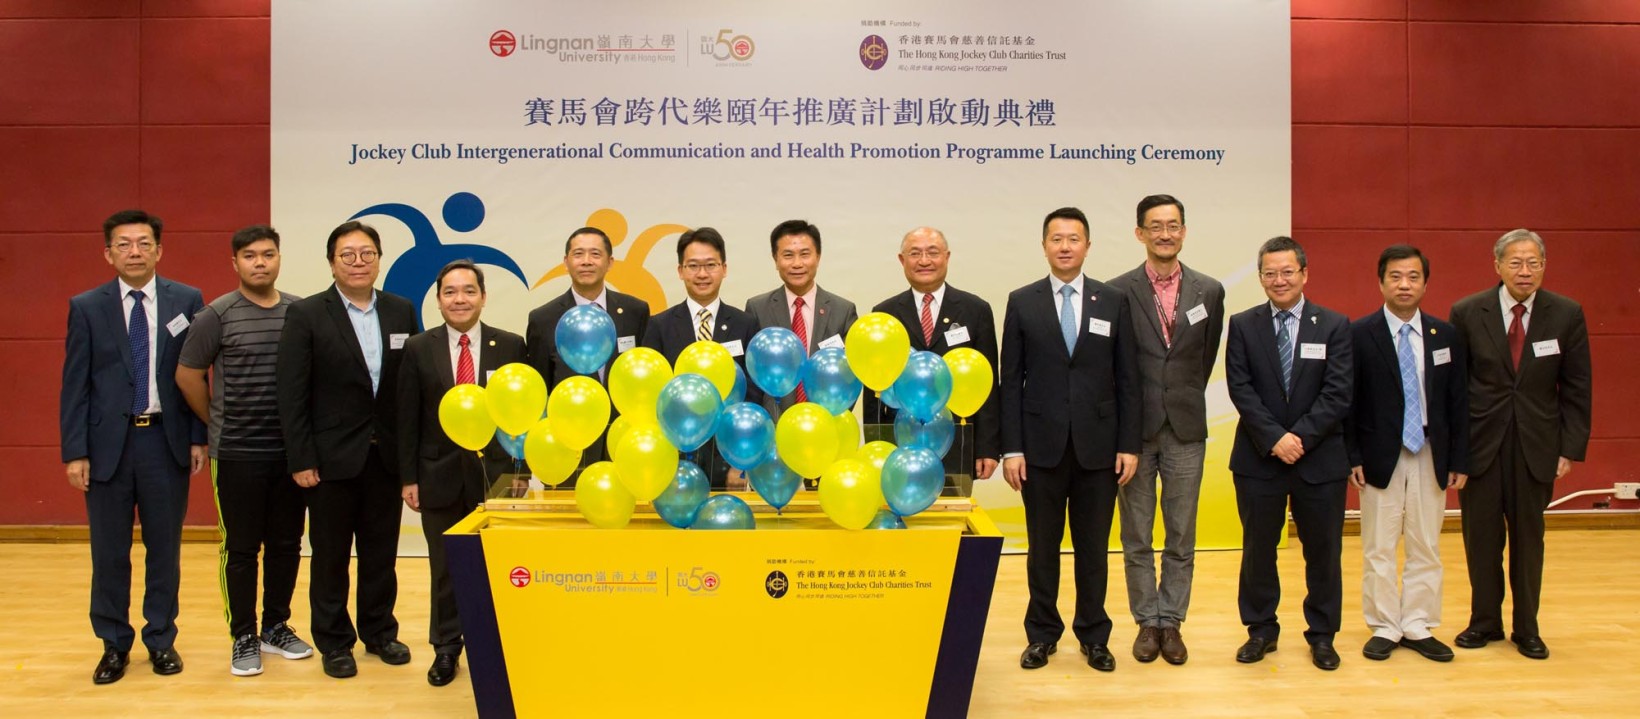 Lingnan University Launches Jockey Club Intergenerational Communication and Health Promotion Programme to advocate healthy ageing and nurture intergenerational solidarity